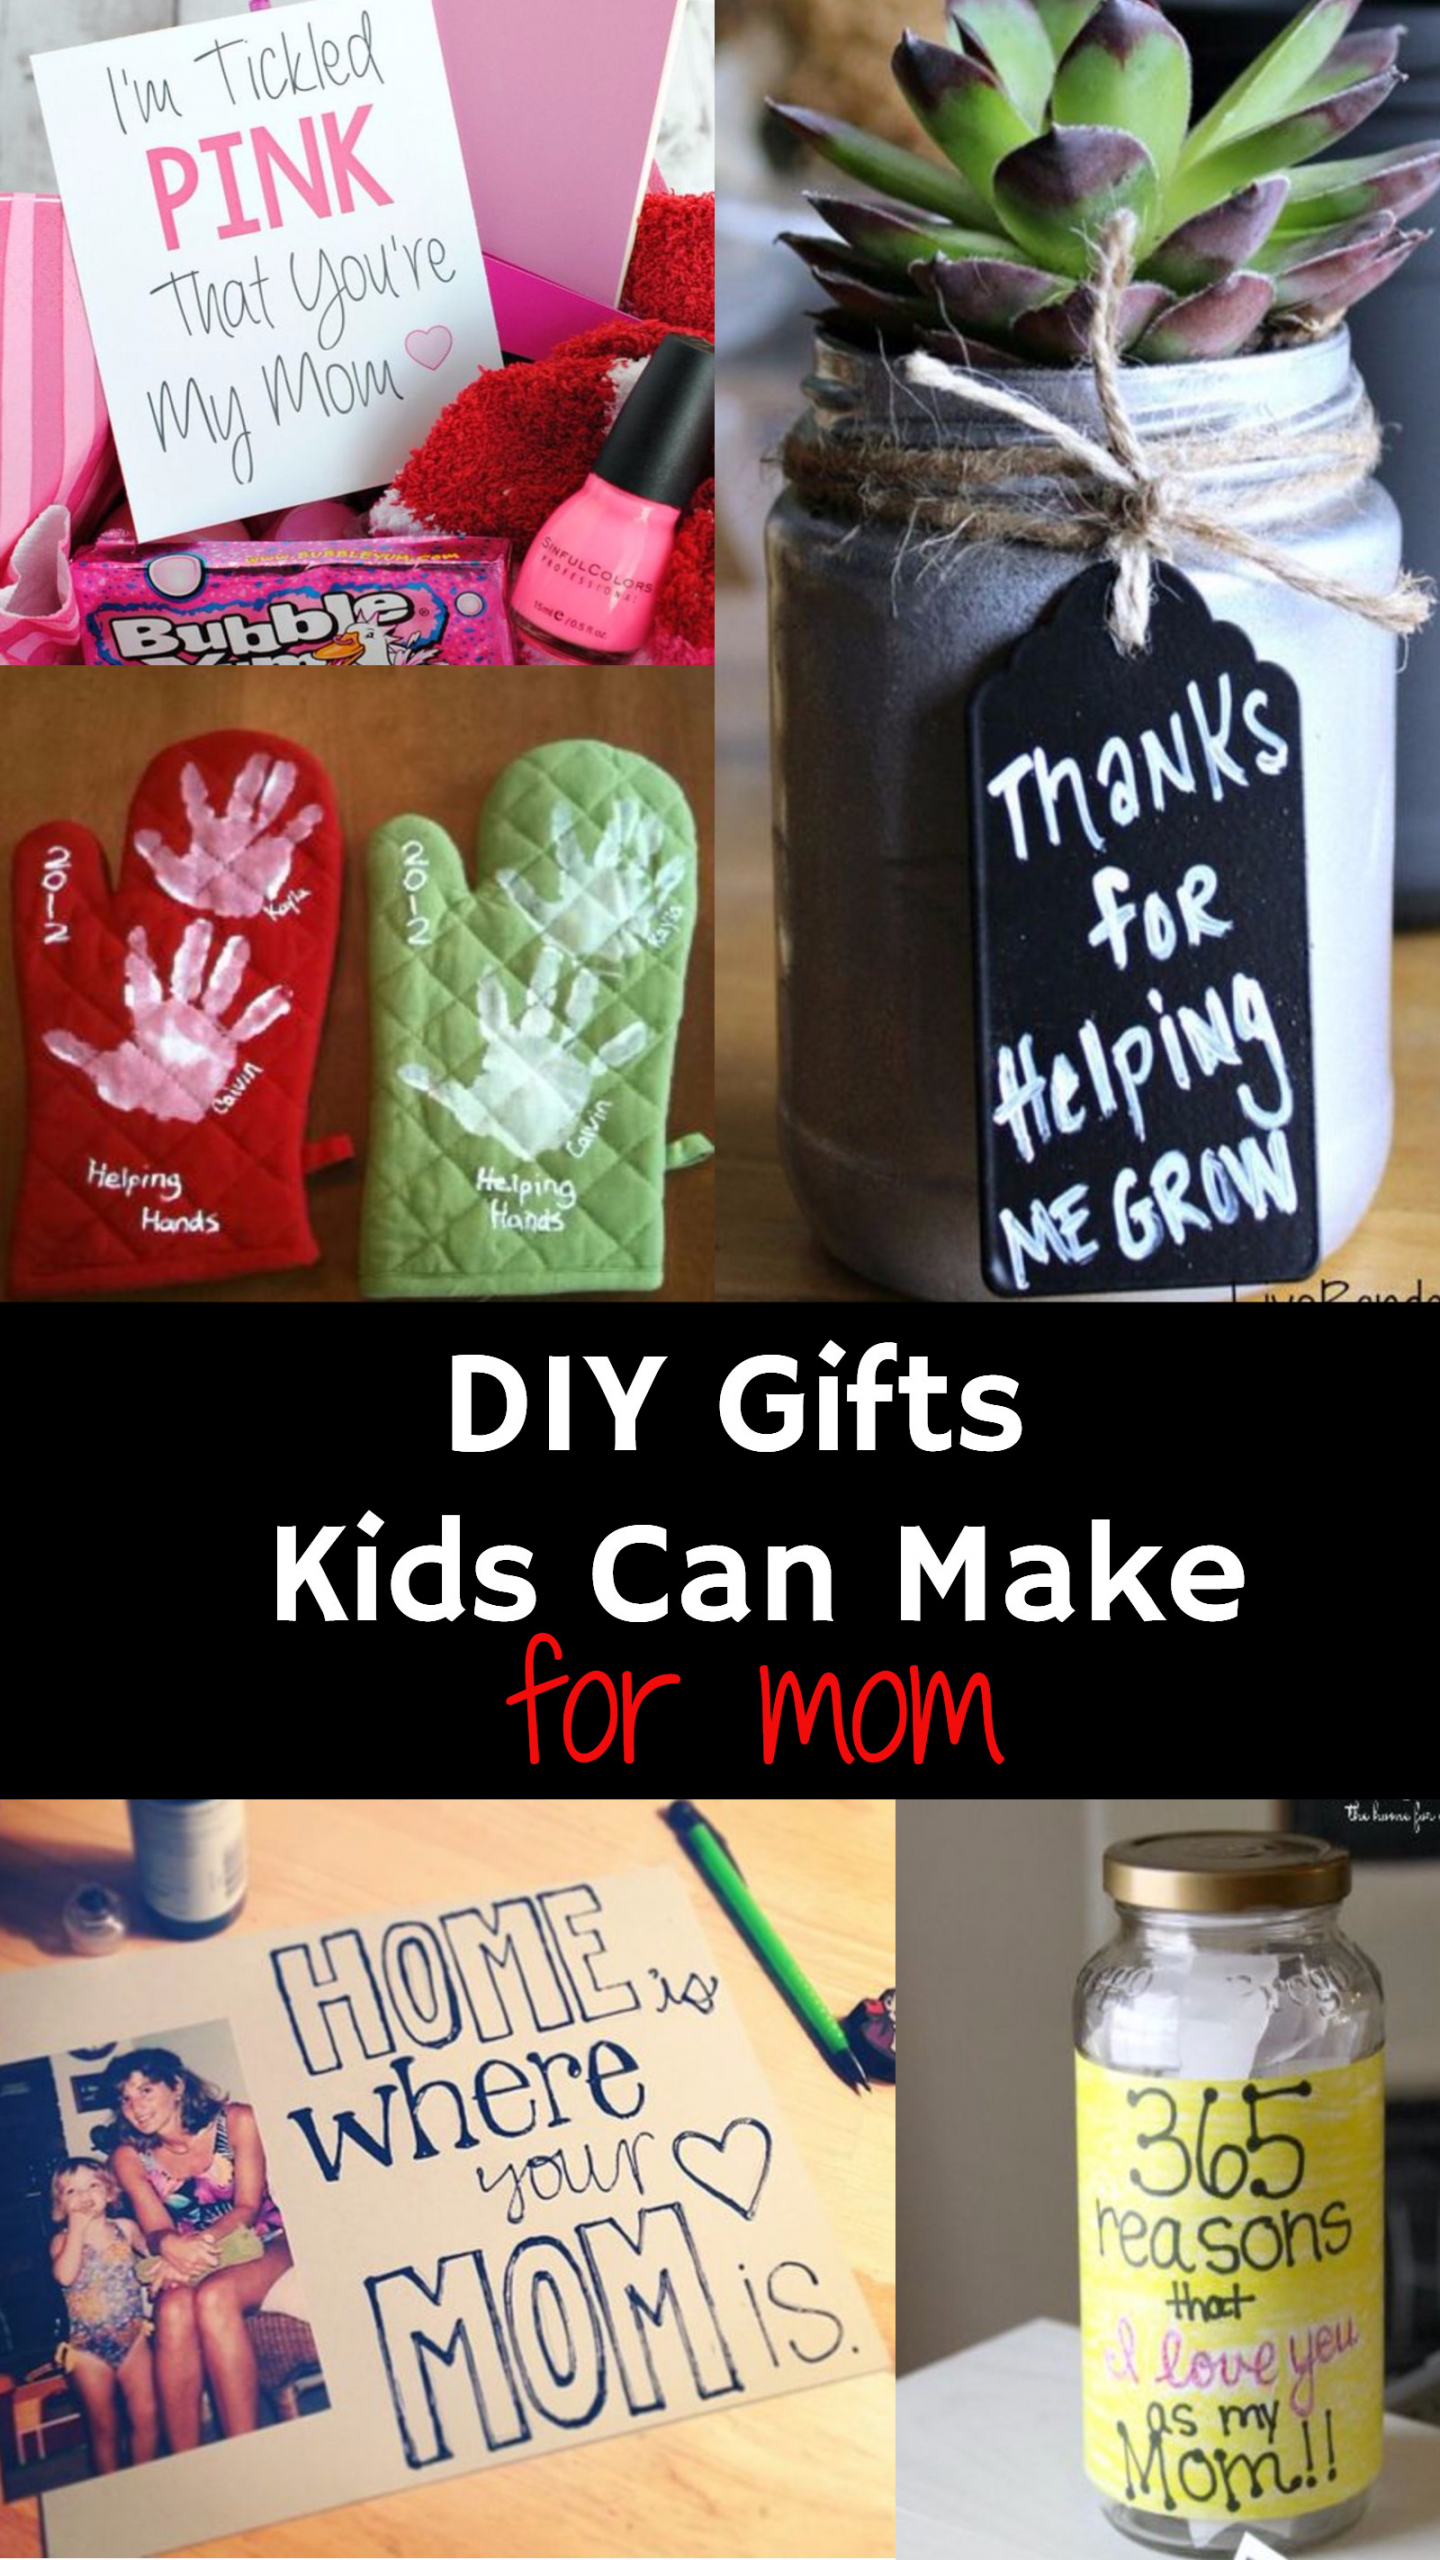 Creative Birthday Gifts For Mom
 DIY Gifts For Mom From Kids